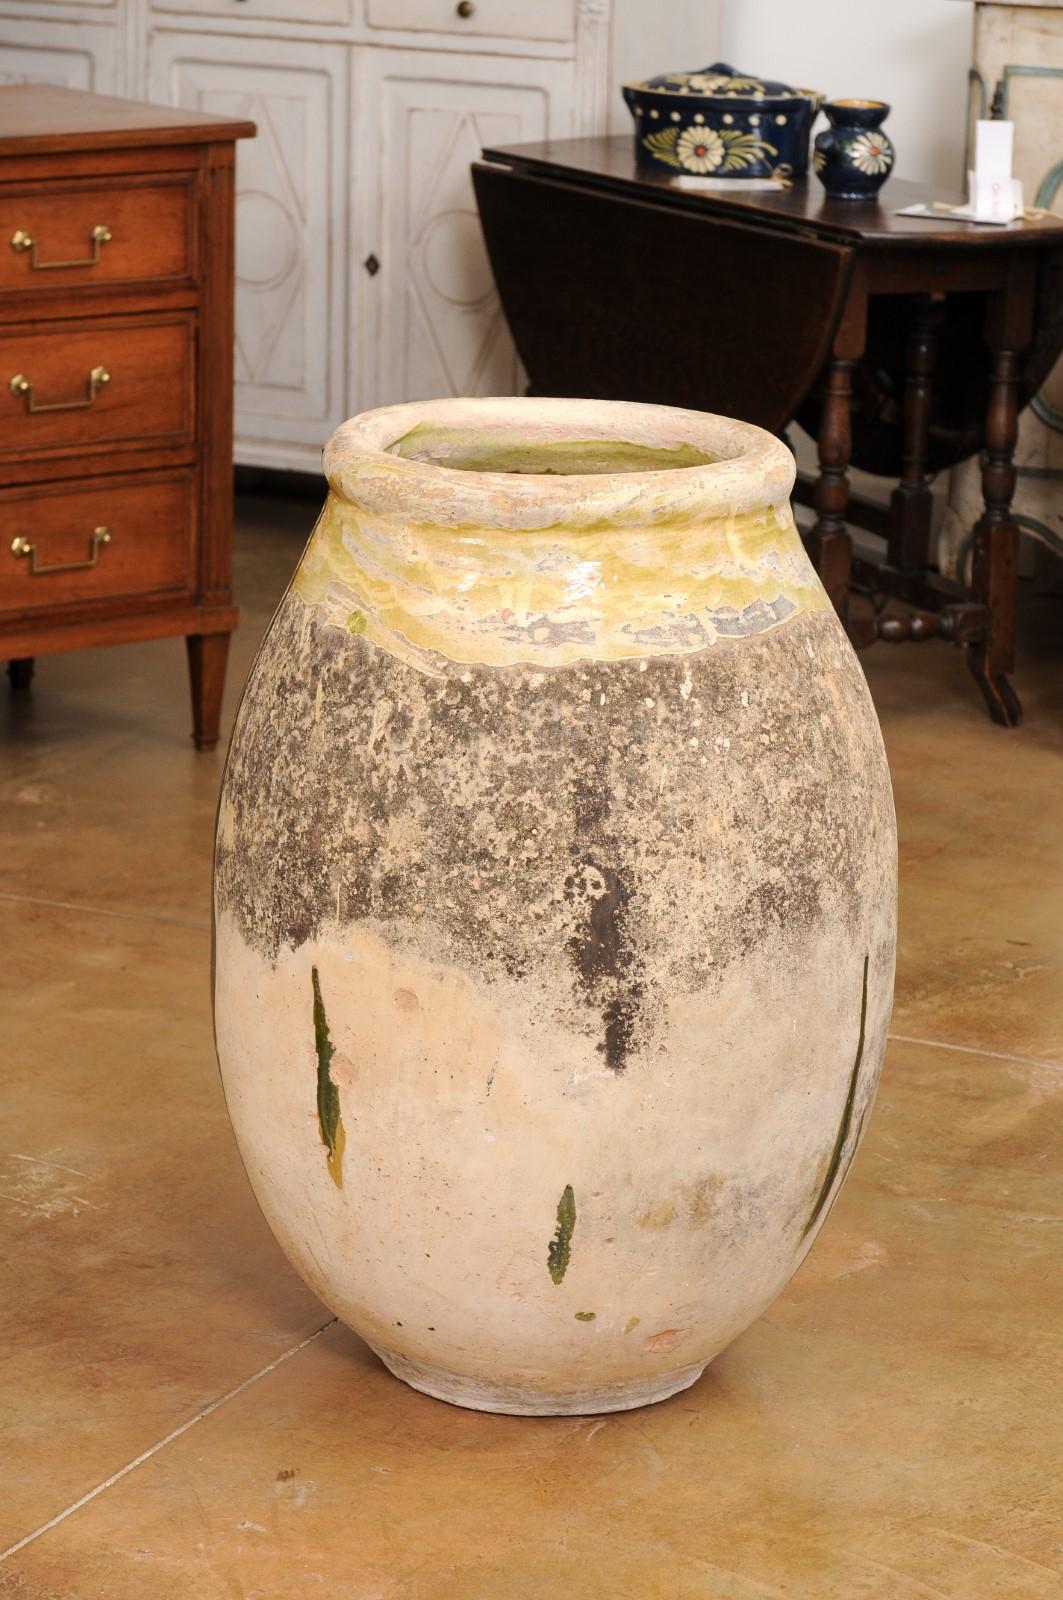 French 19th Century Terracotta Biot Jar with Yellow Glaze and Rustic Character For Sale 1